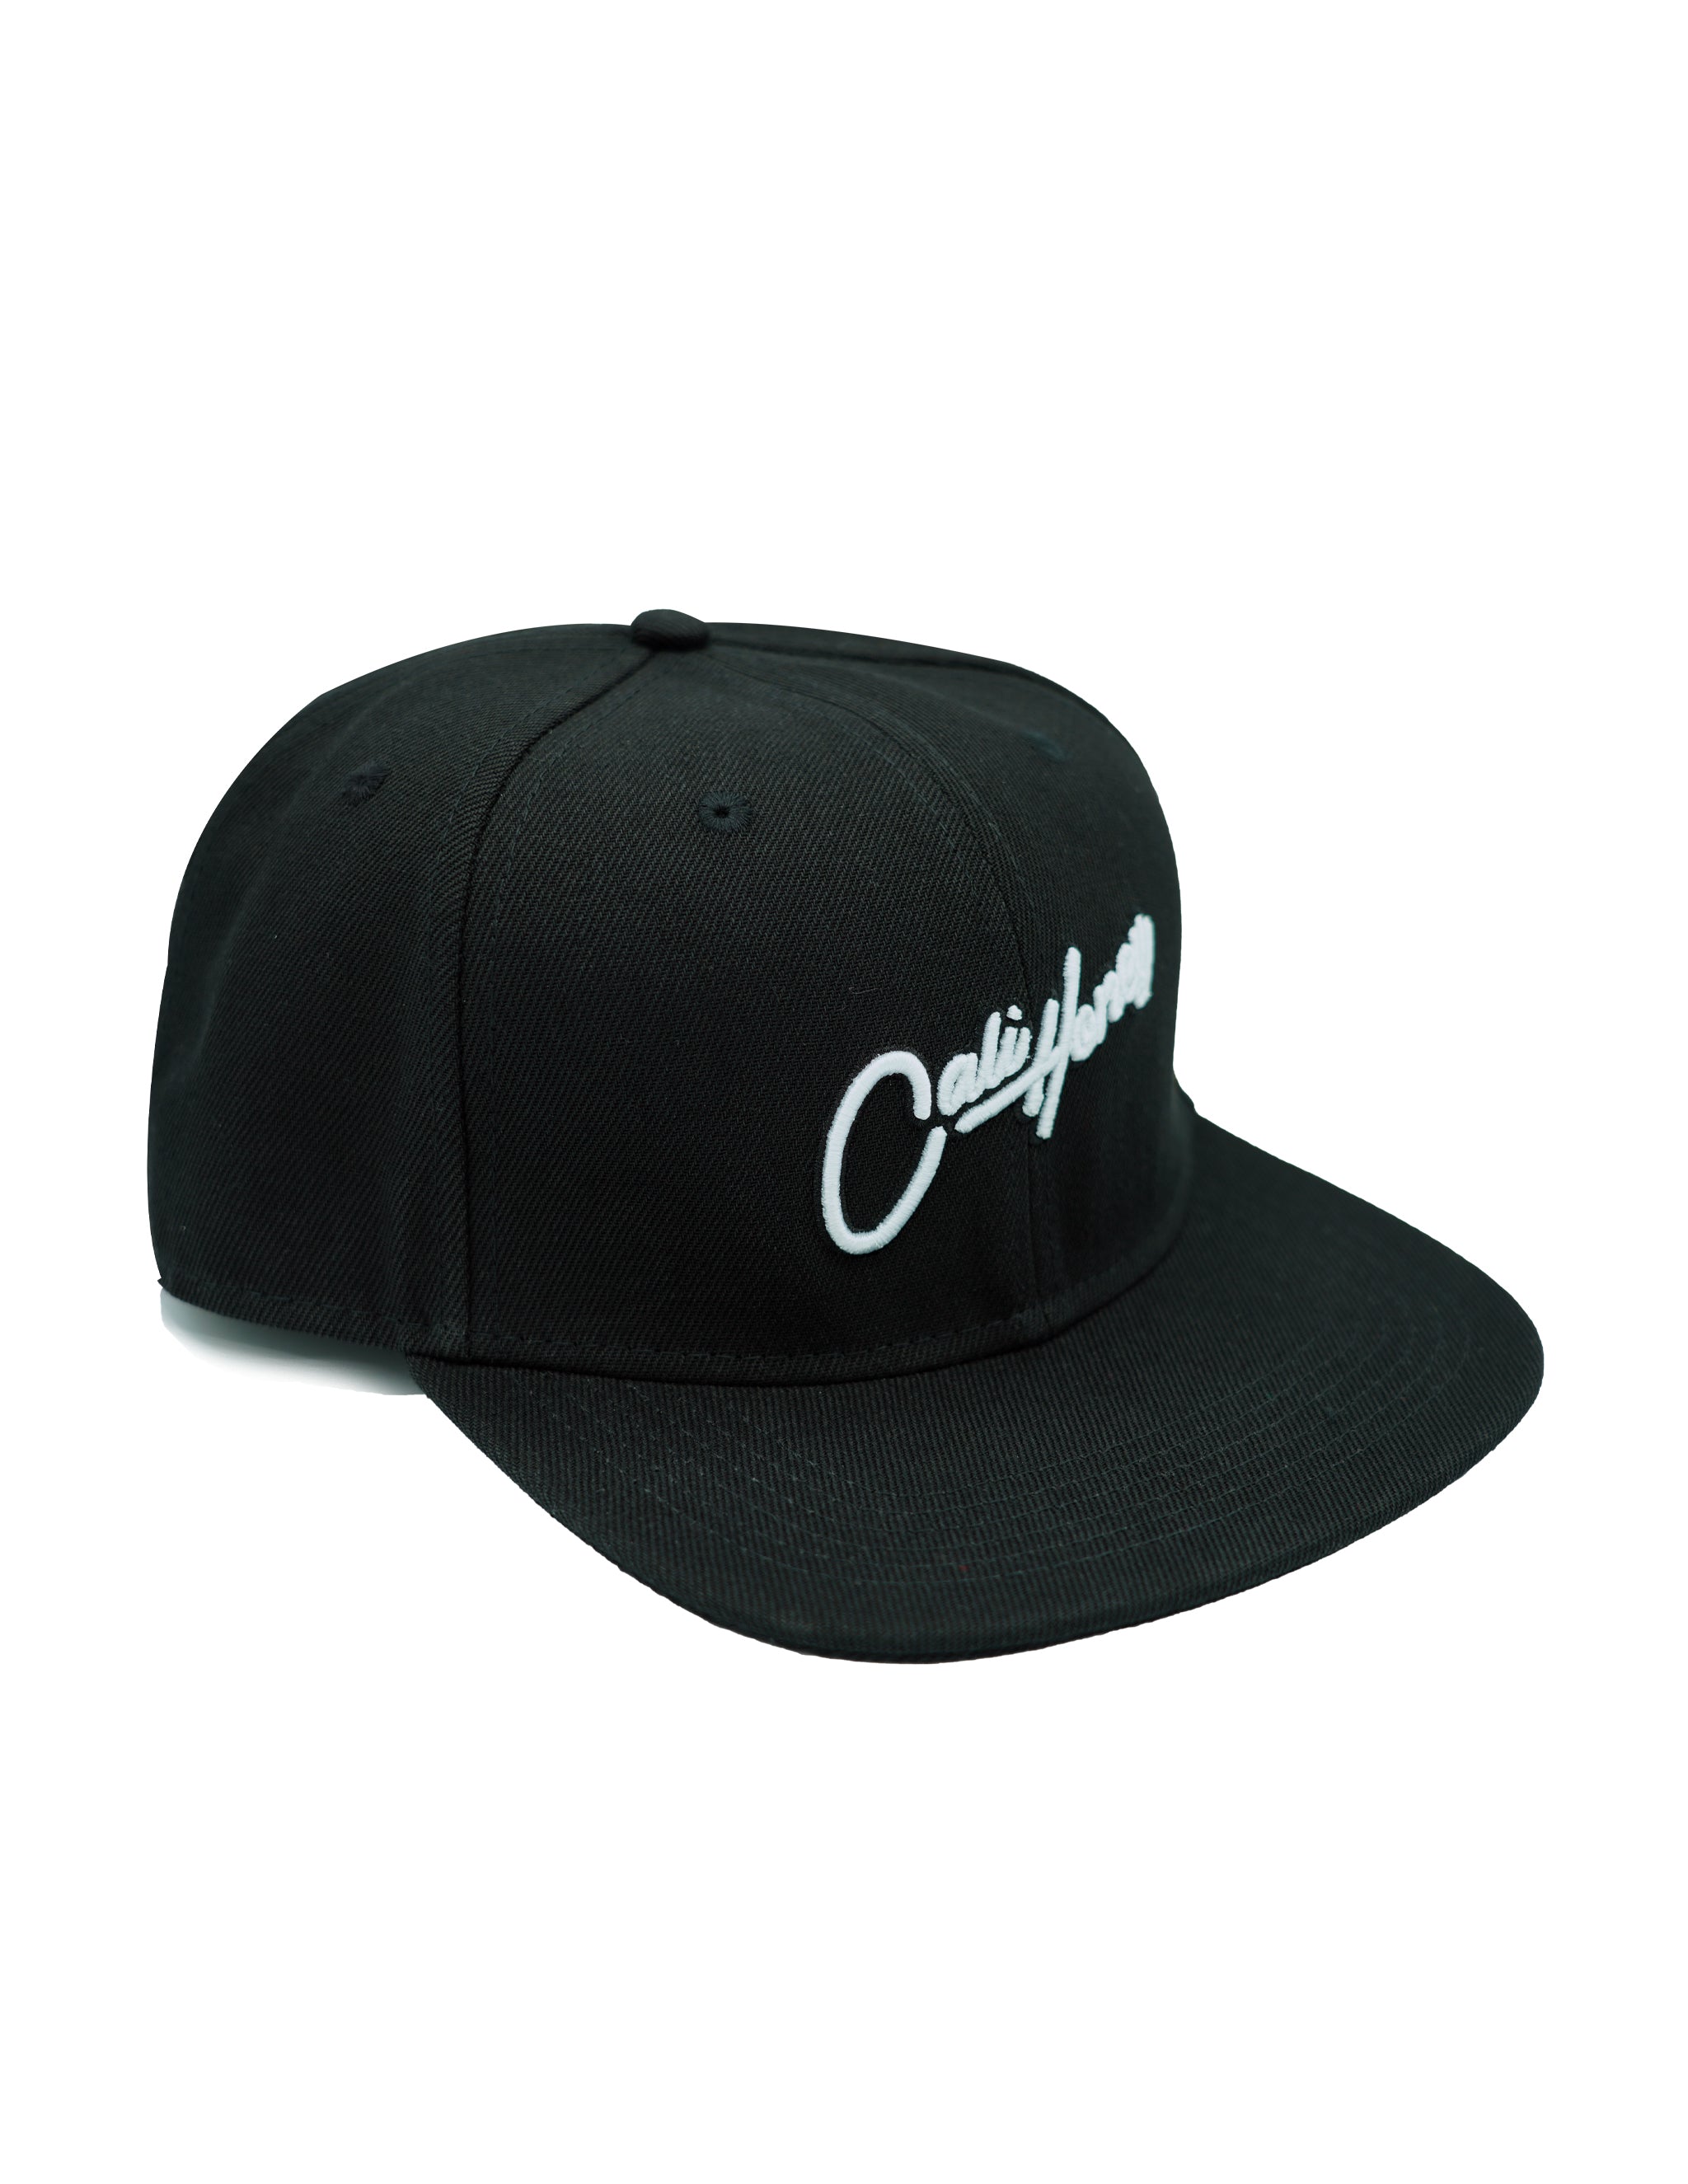 Cursive Fitted Hat